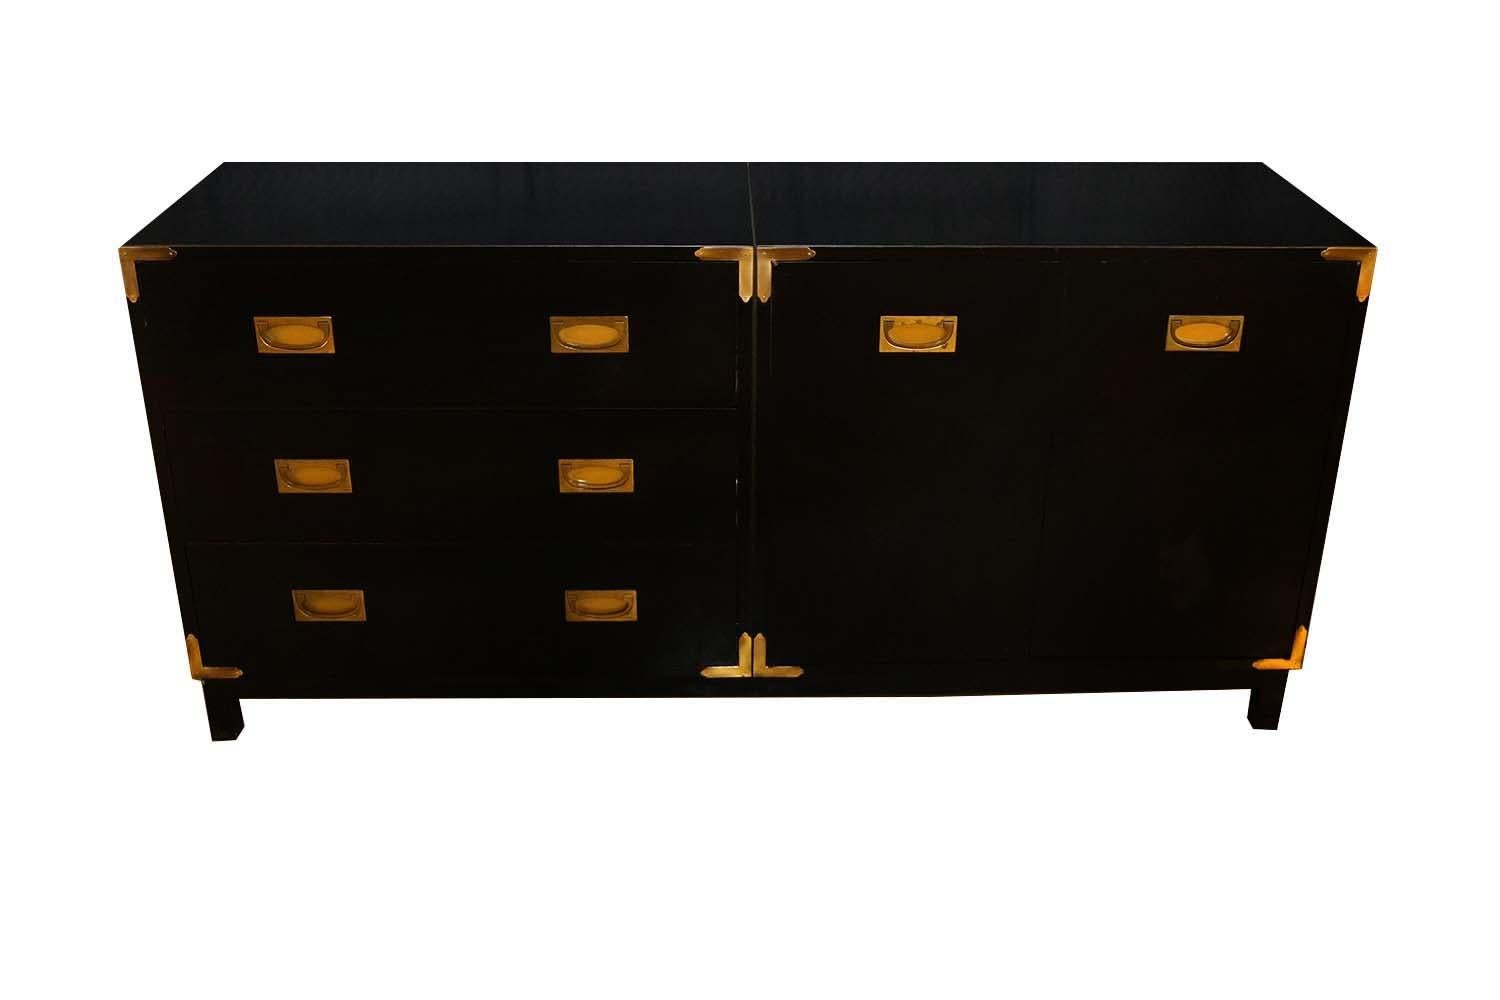 This striking custom black lacquered sideboard has a classic campaign design, fashioned out of two smaller chests, to create one larger unit, adorned in brass trim on sides and front. The left side features three symmetrical stacking drawers with